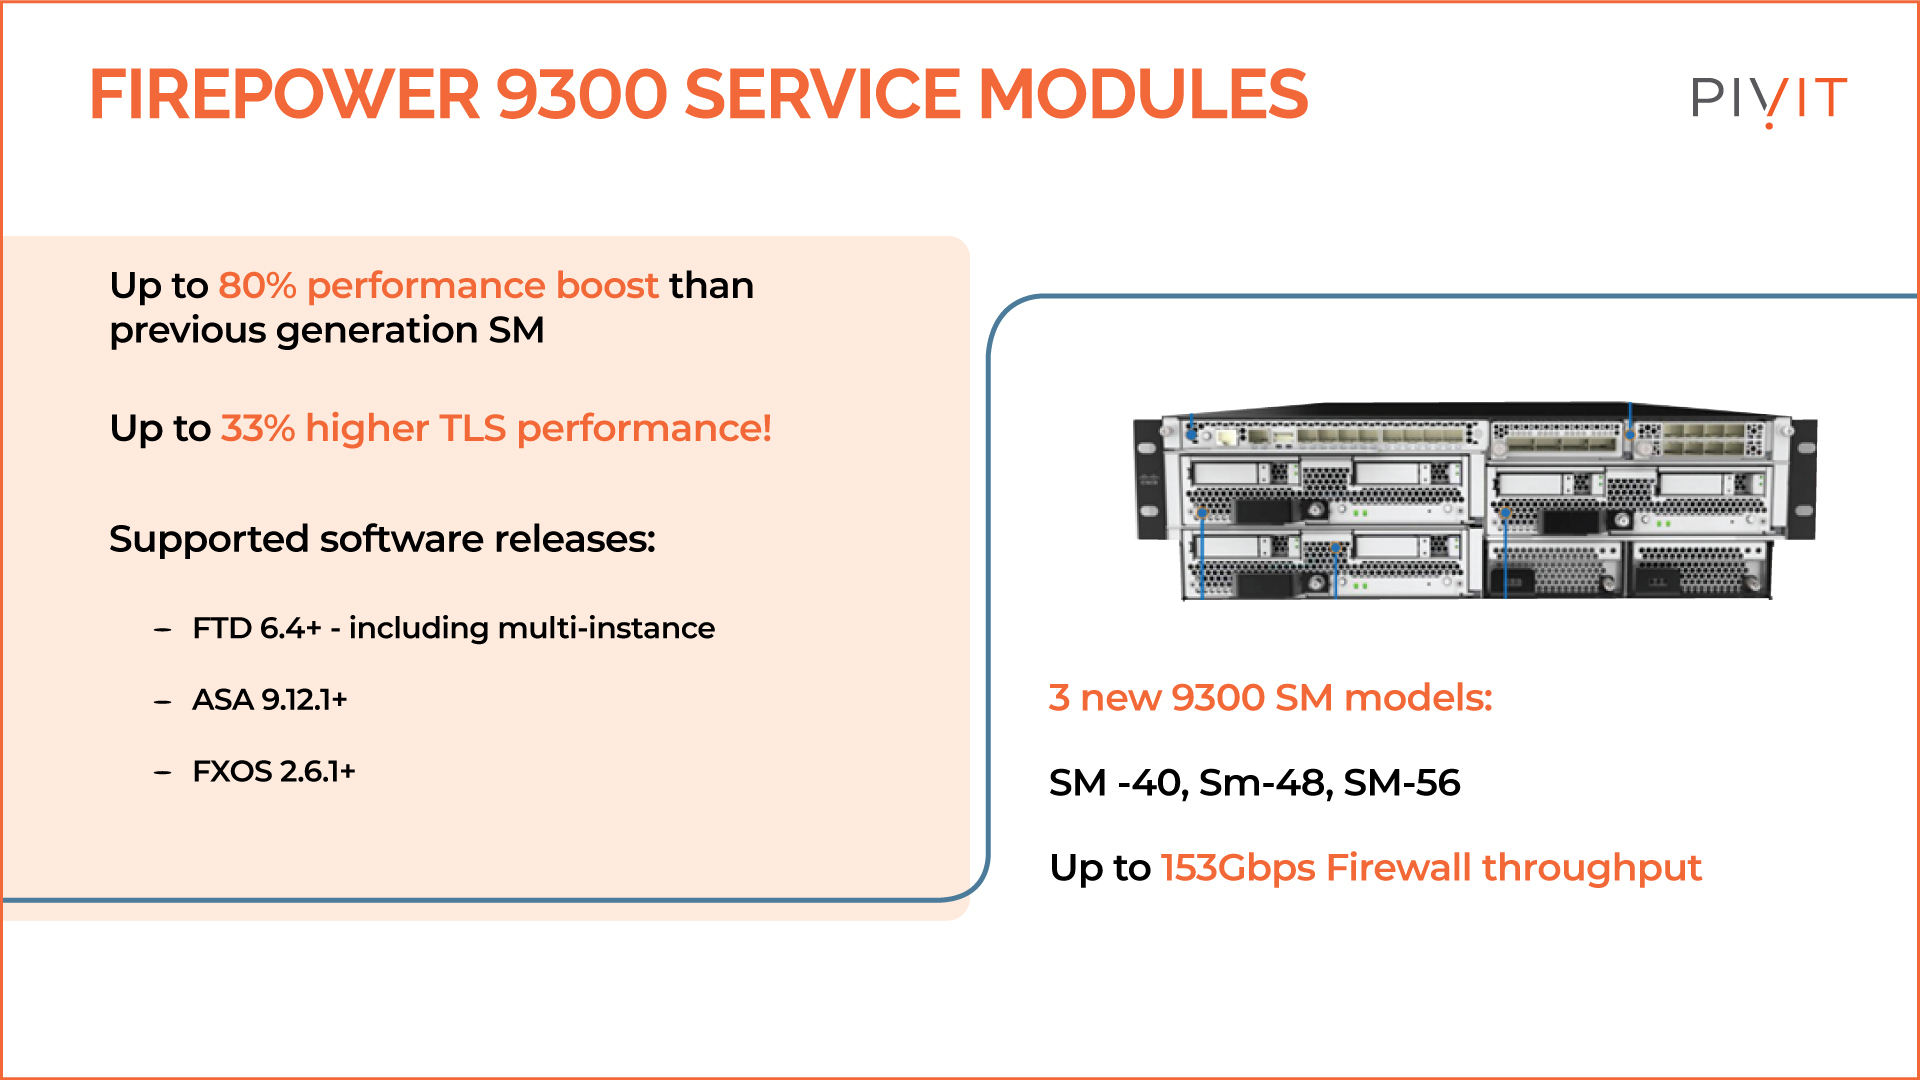 Firepower 9300 service module types and statistics